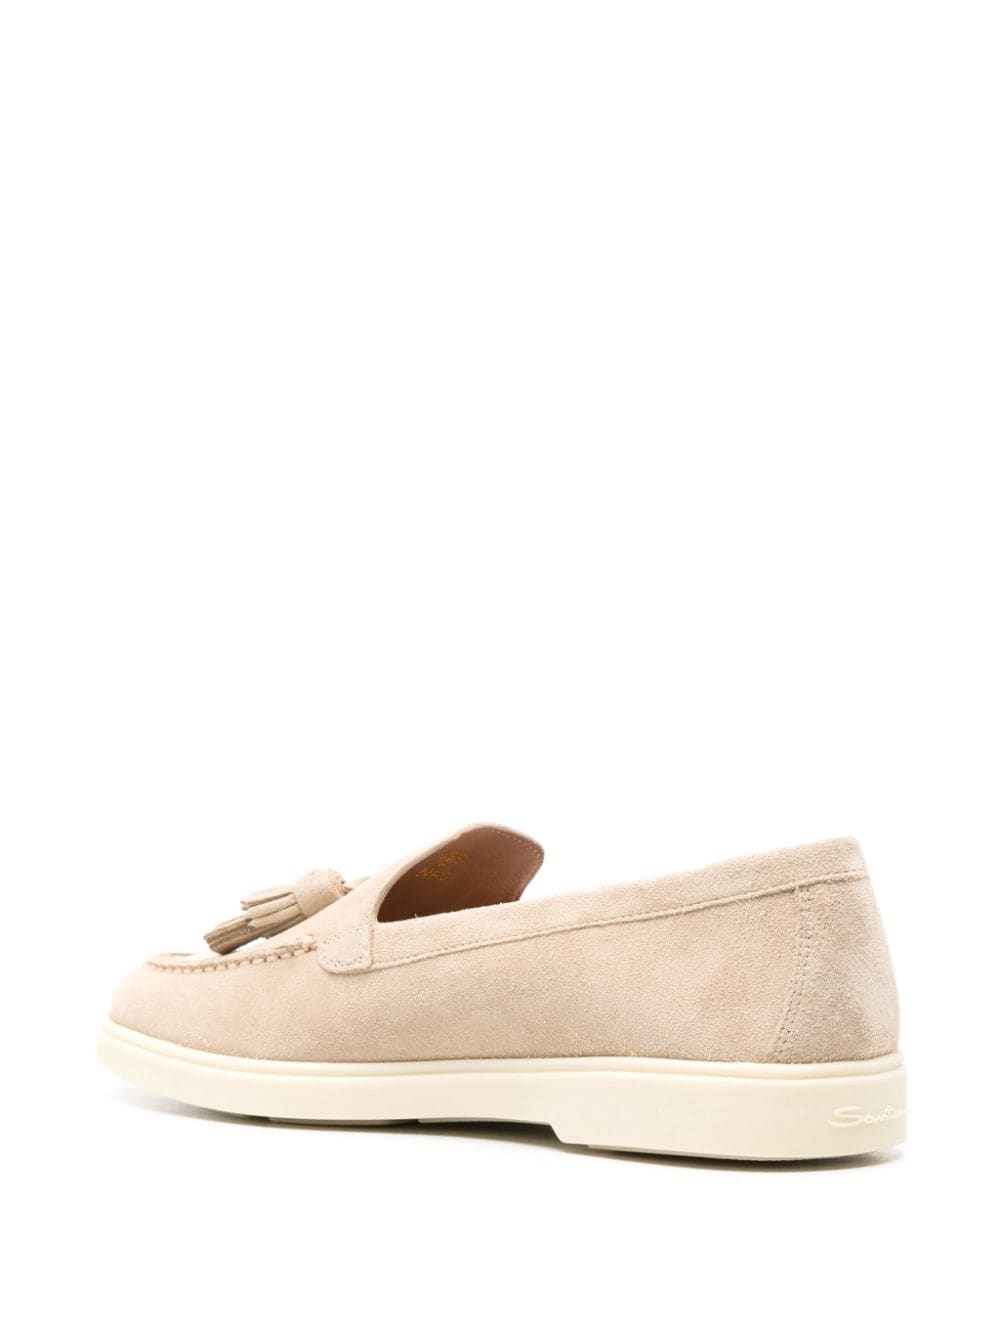 tassel-detailed suede loafers - 3